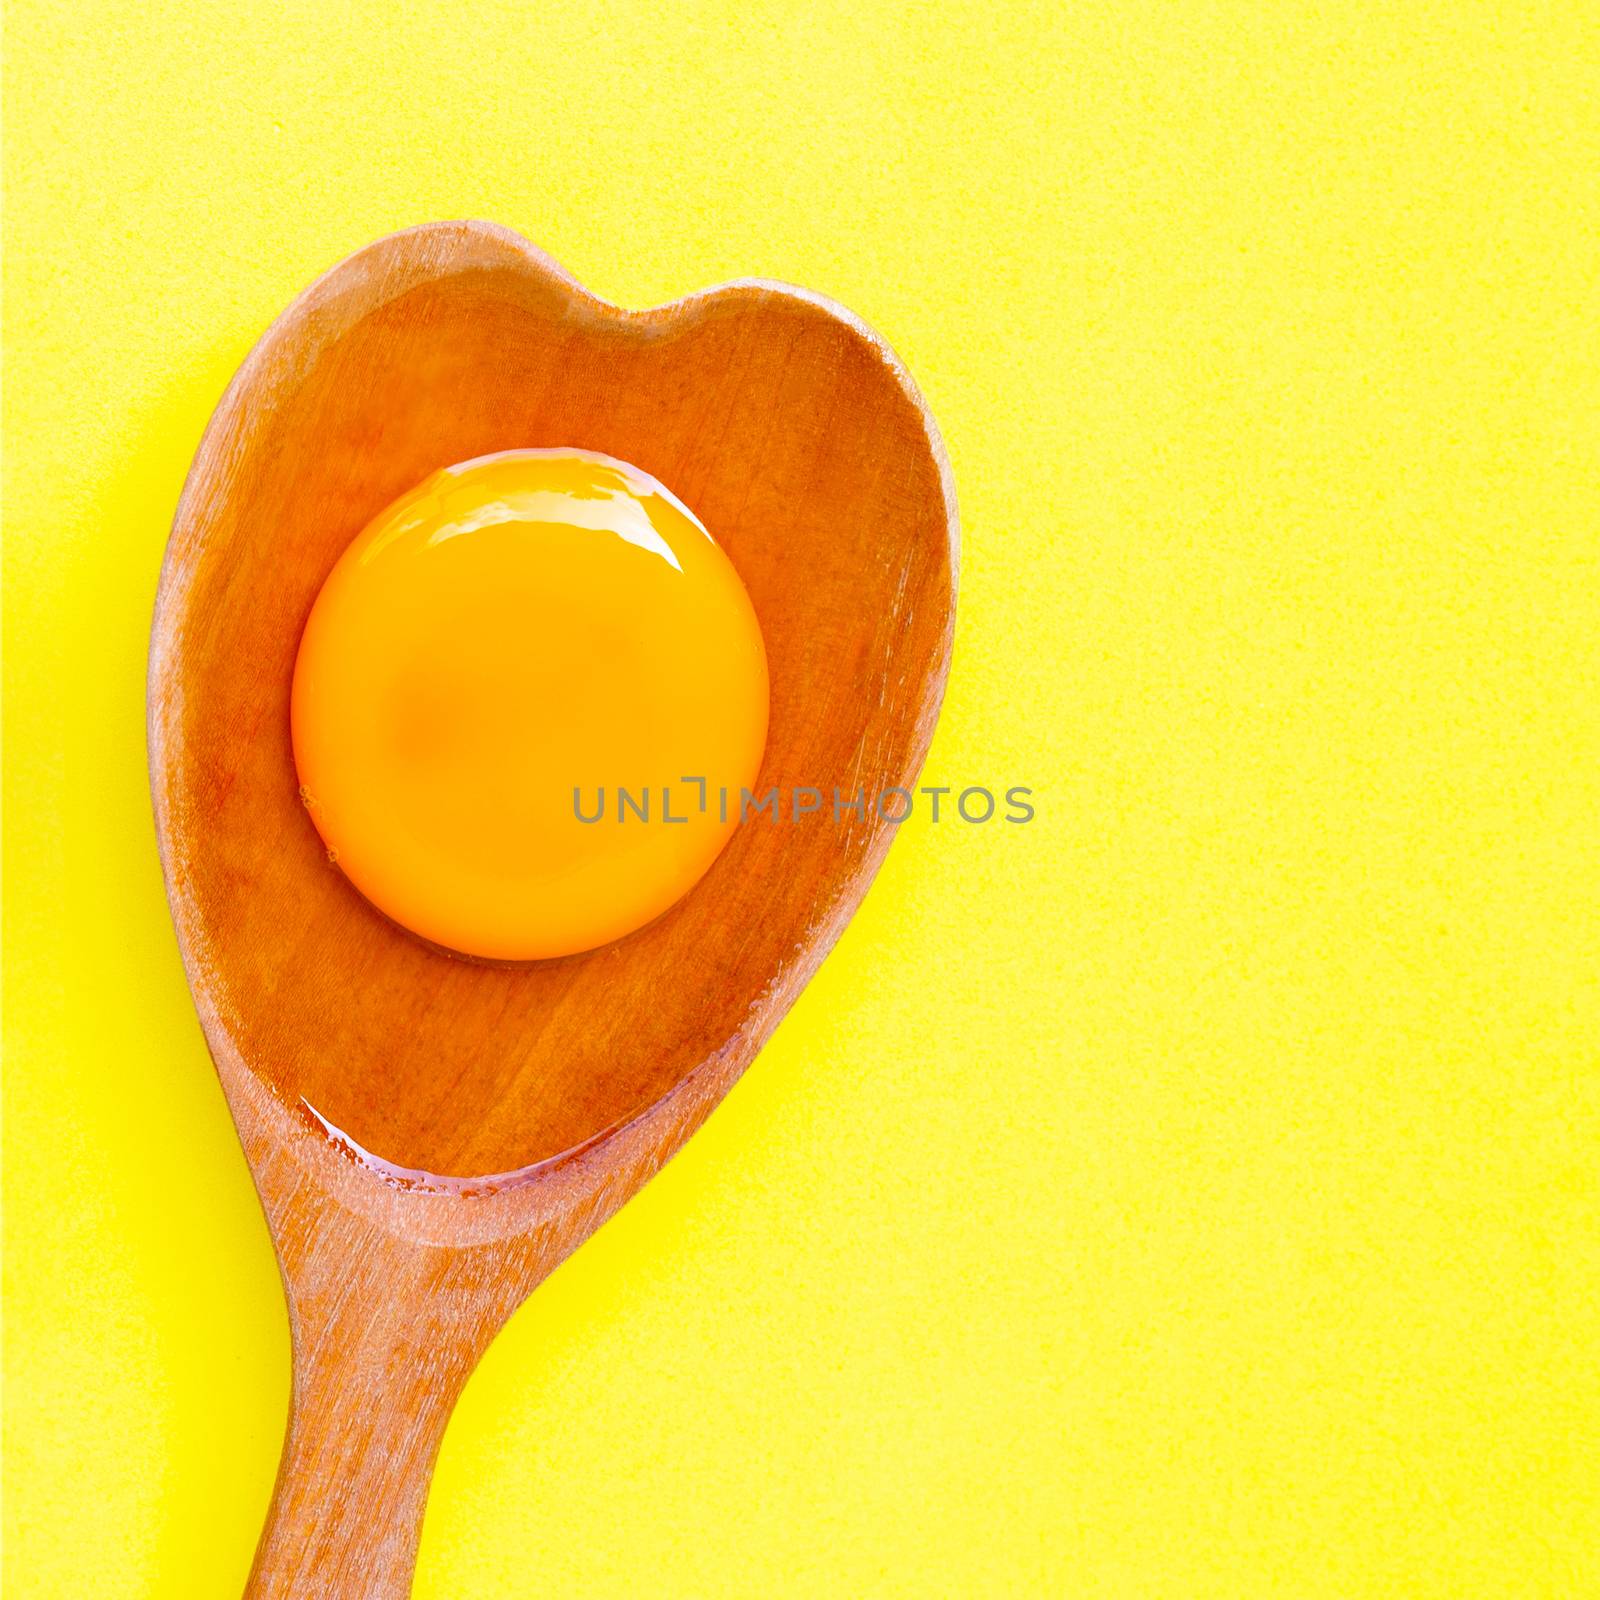 Egg yolk and white on  wooden spoon heart shape on yellow backgr by Bowonpat